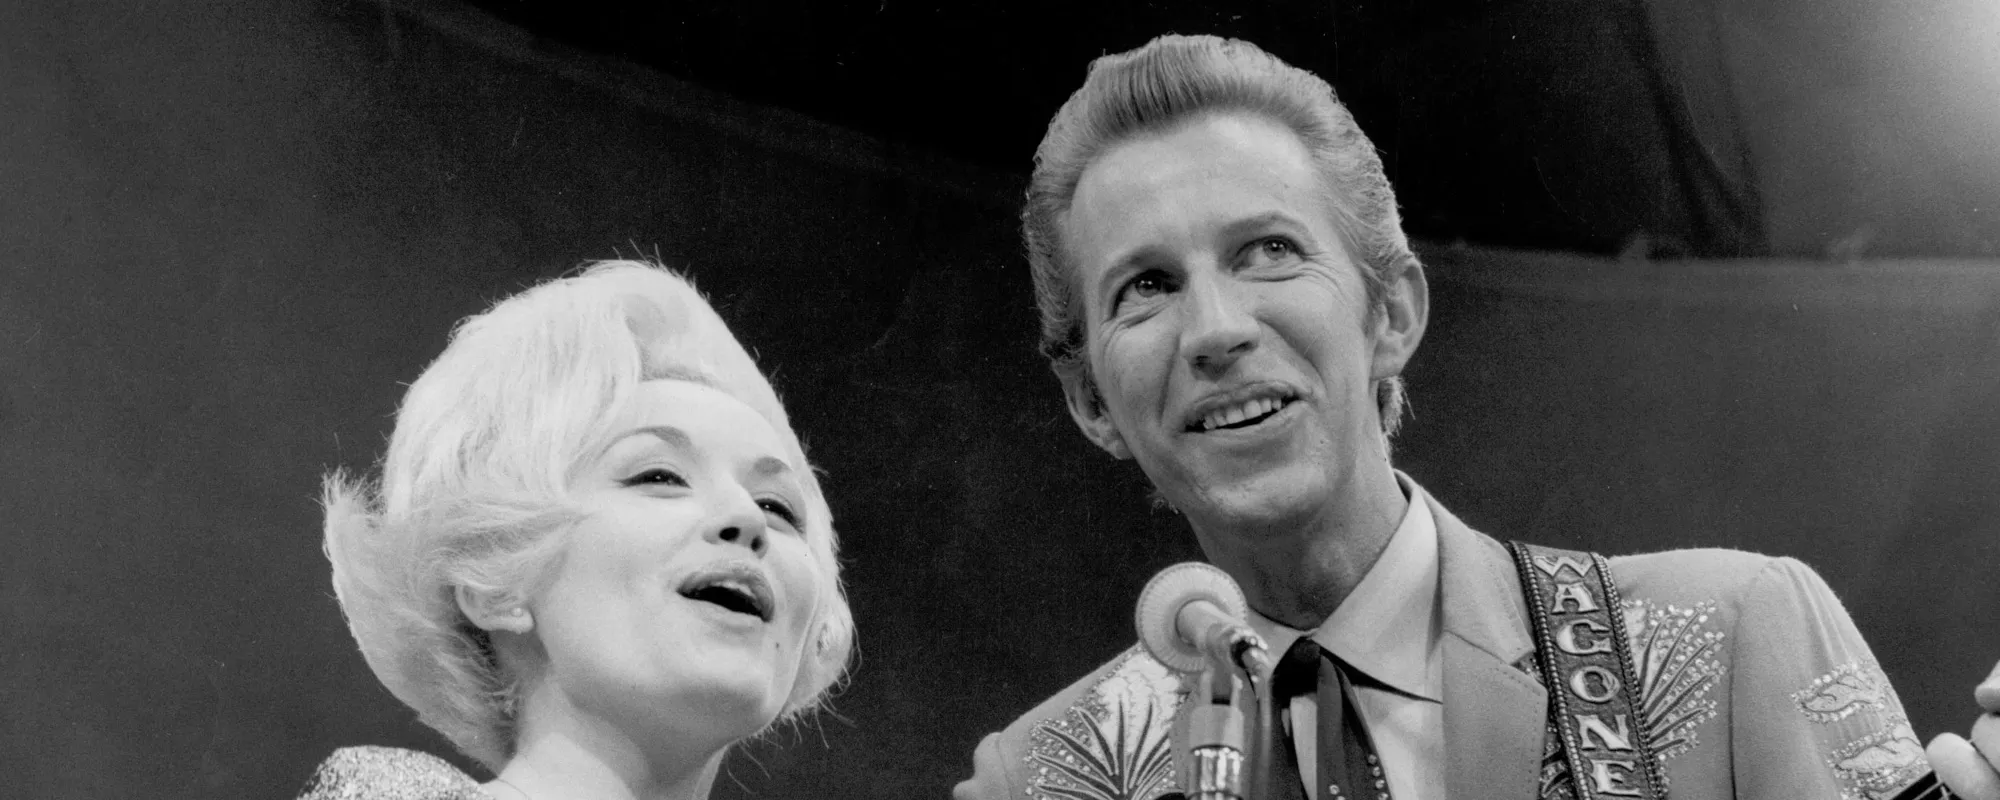 We Asked A.I. to Write One Last Duet for Dolly Parton and Porter Wagoner – This is What We Got